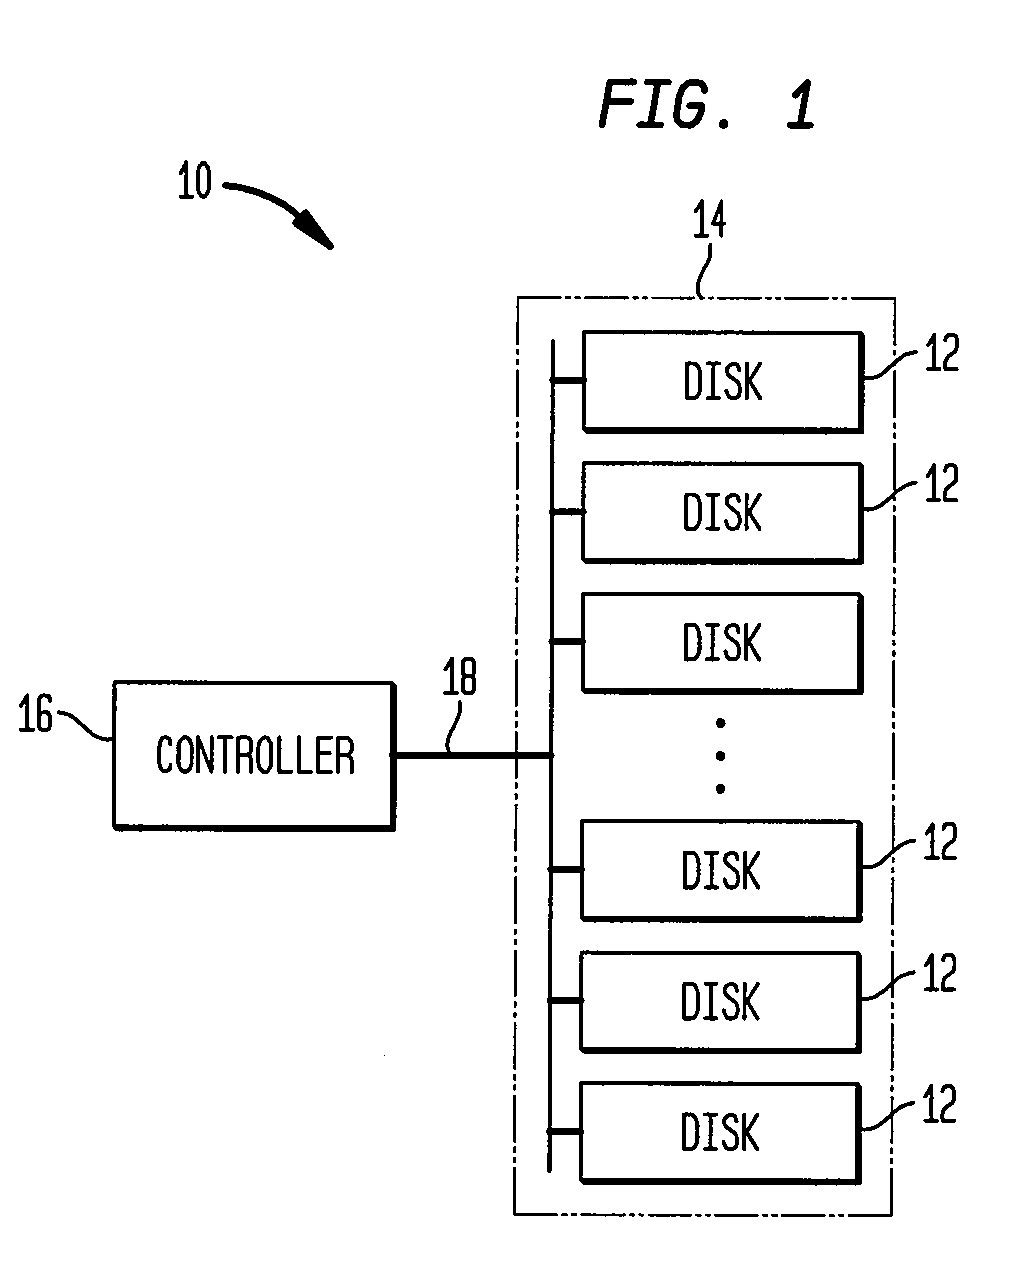 Lower power disk array as a replacement for robotic tape storage